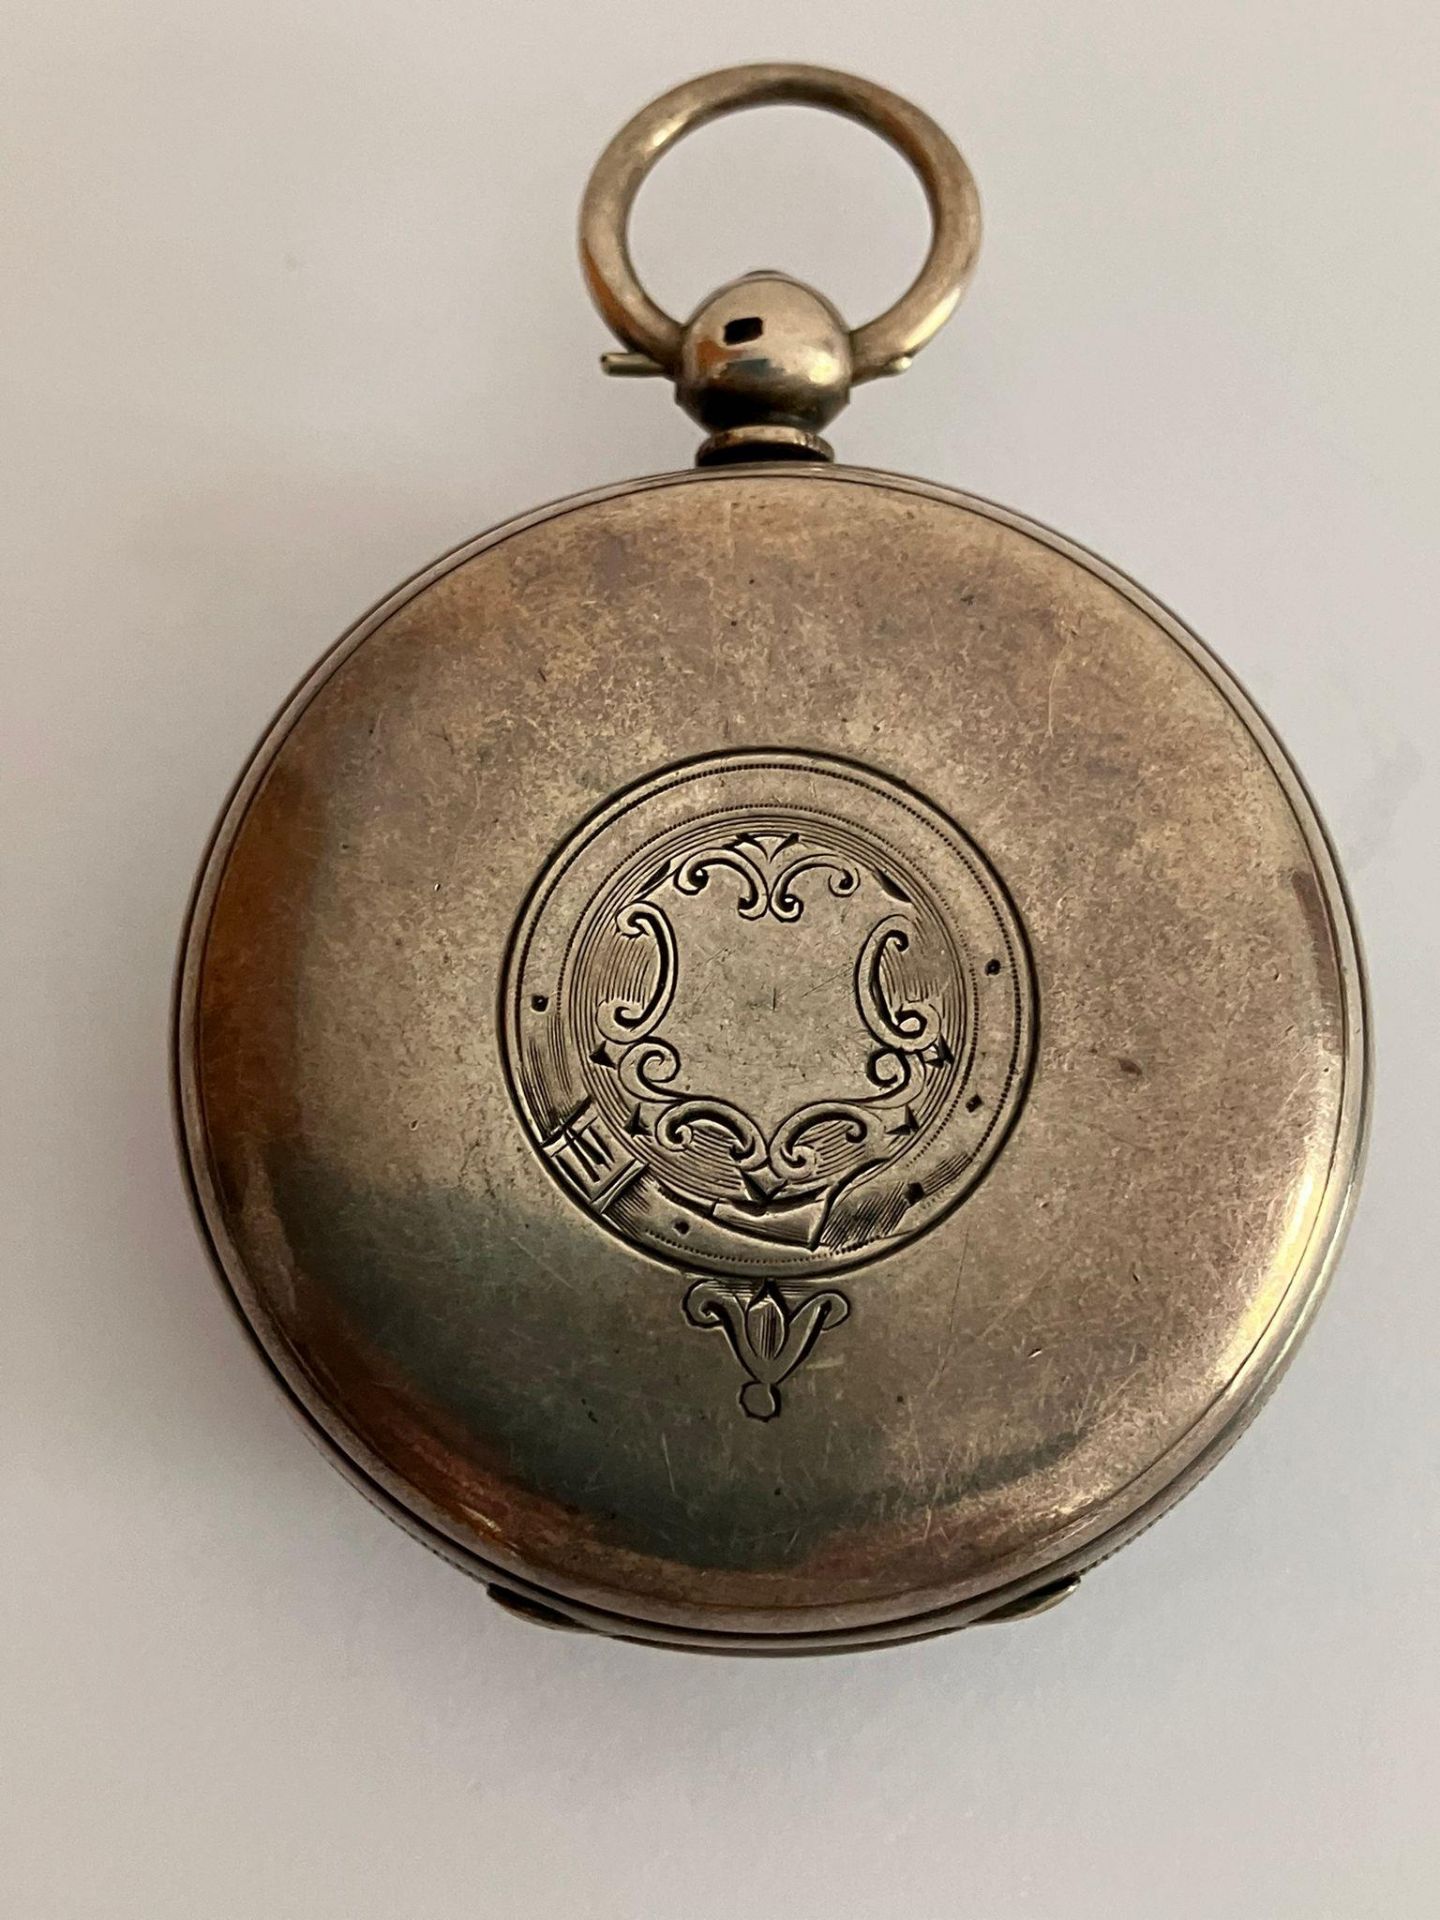 Antique SILVER POCKET WATCH with Silver Case hallmarked Robert John Pike, London 1873. Watch - Image 4 of 10